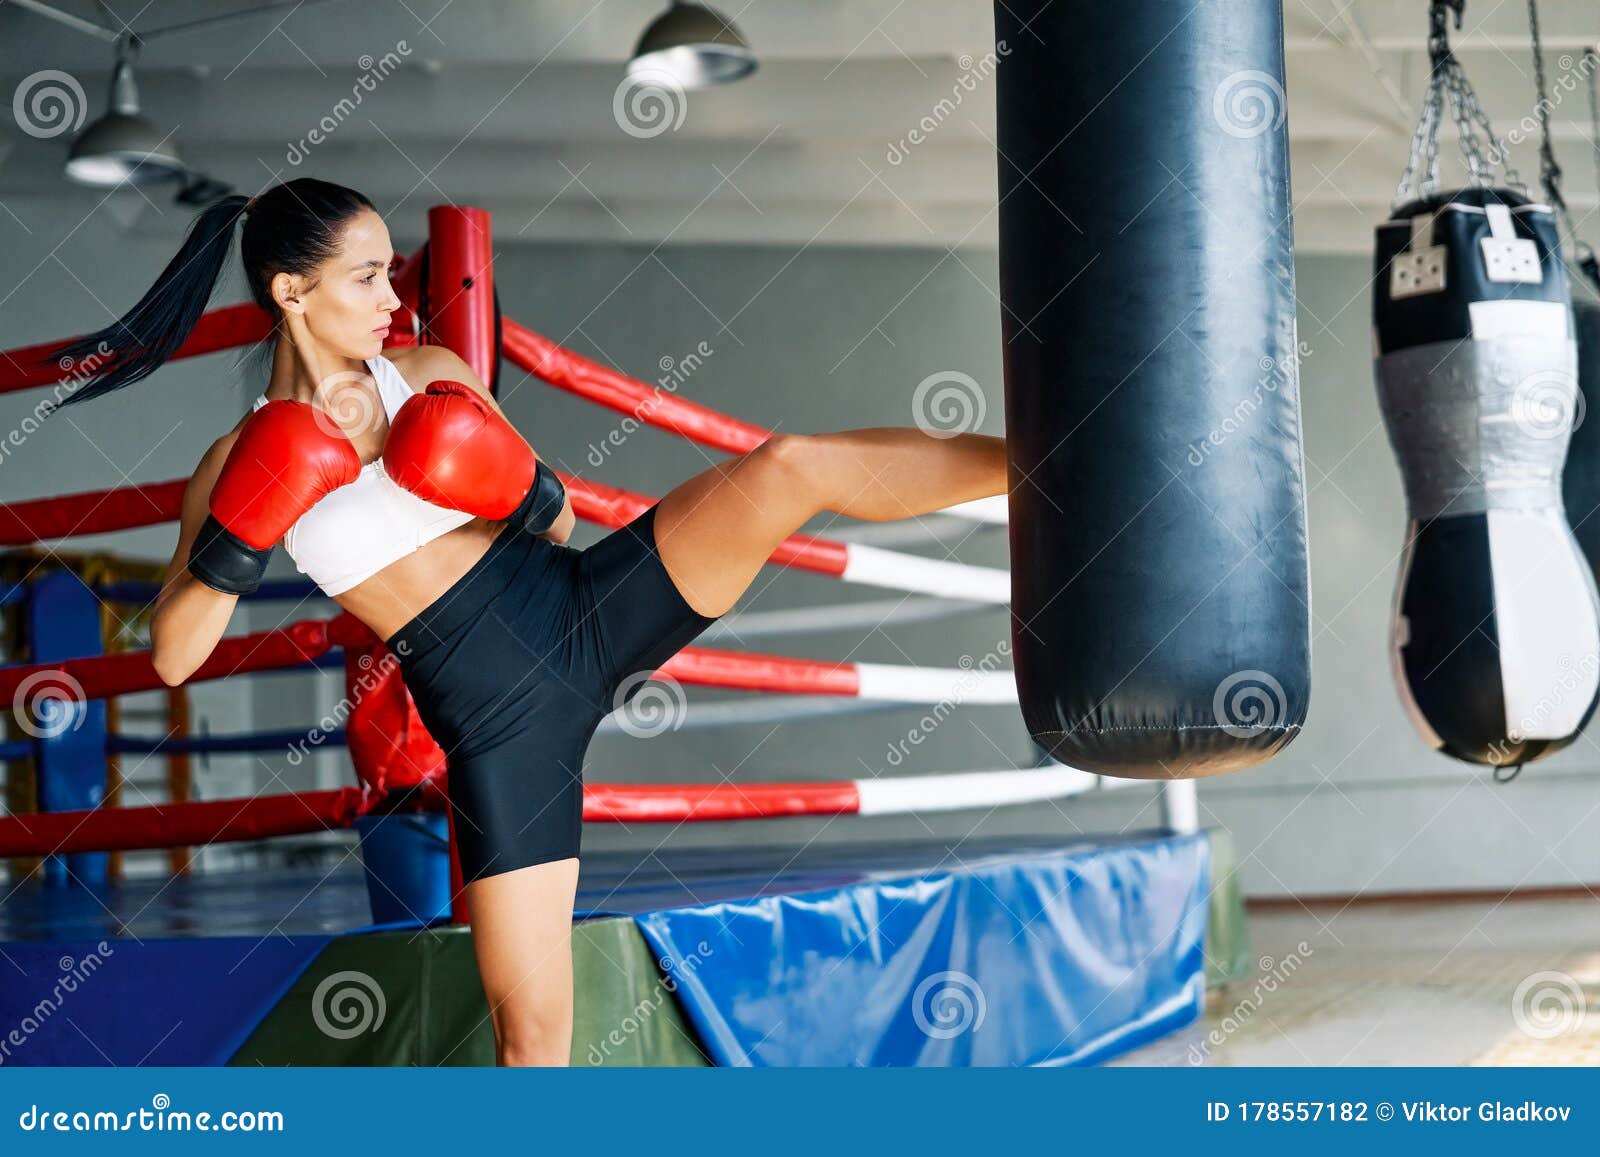 Does Hitting a Punching Bag Help Lose Weight  livestrong